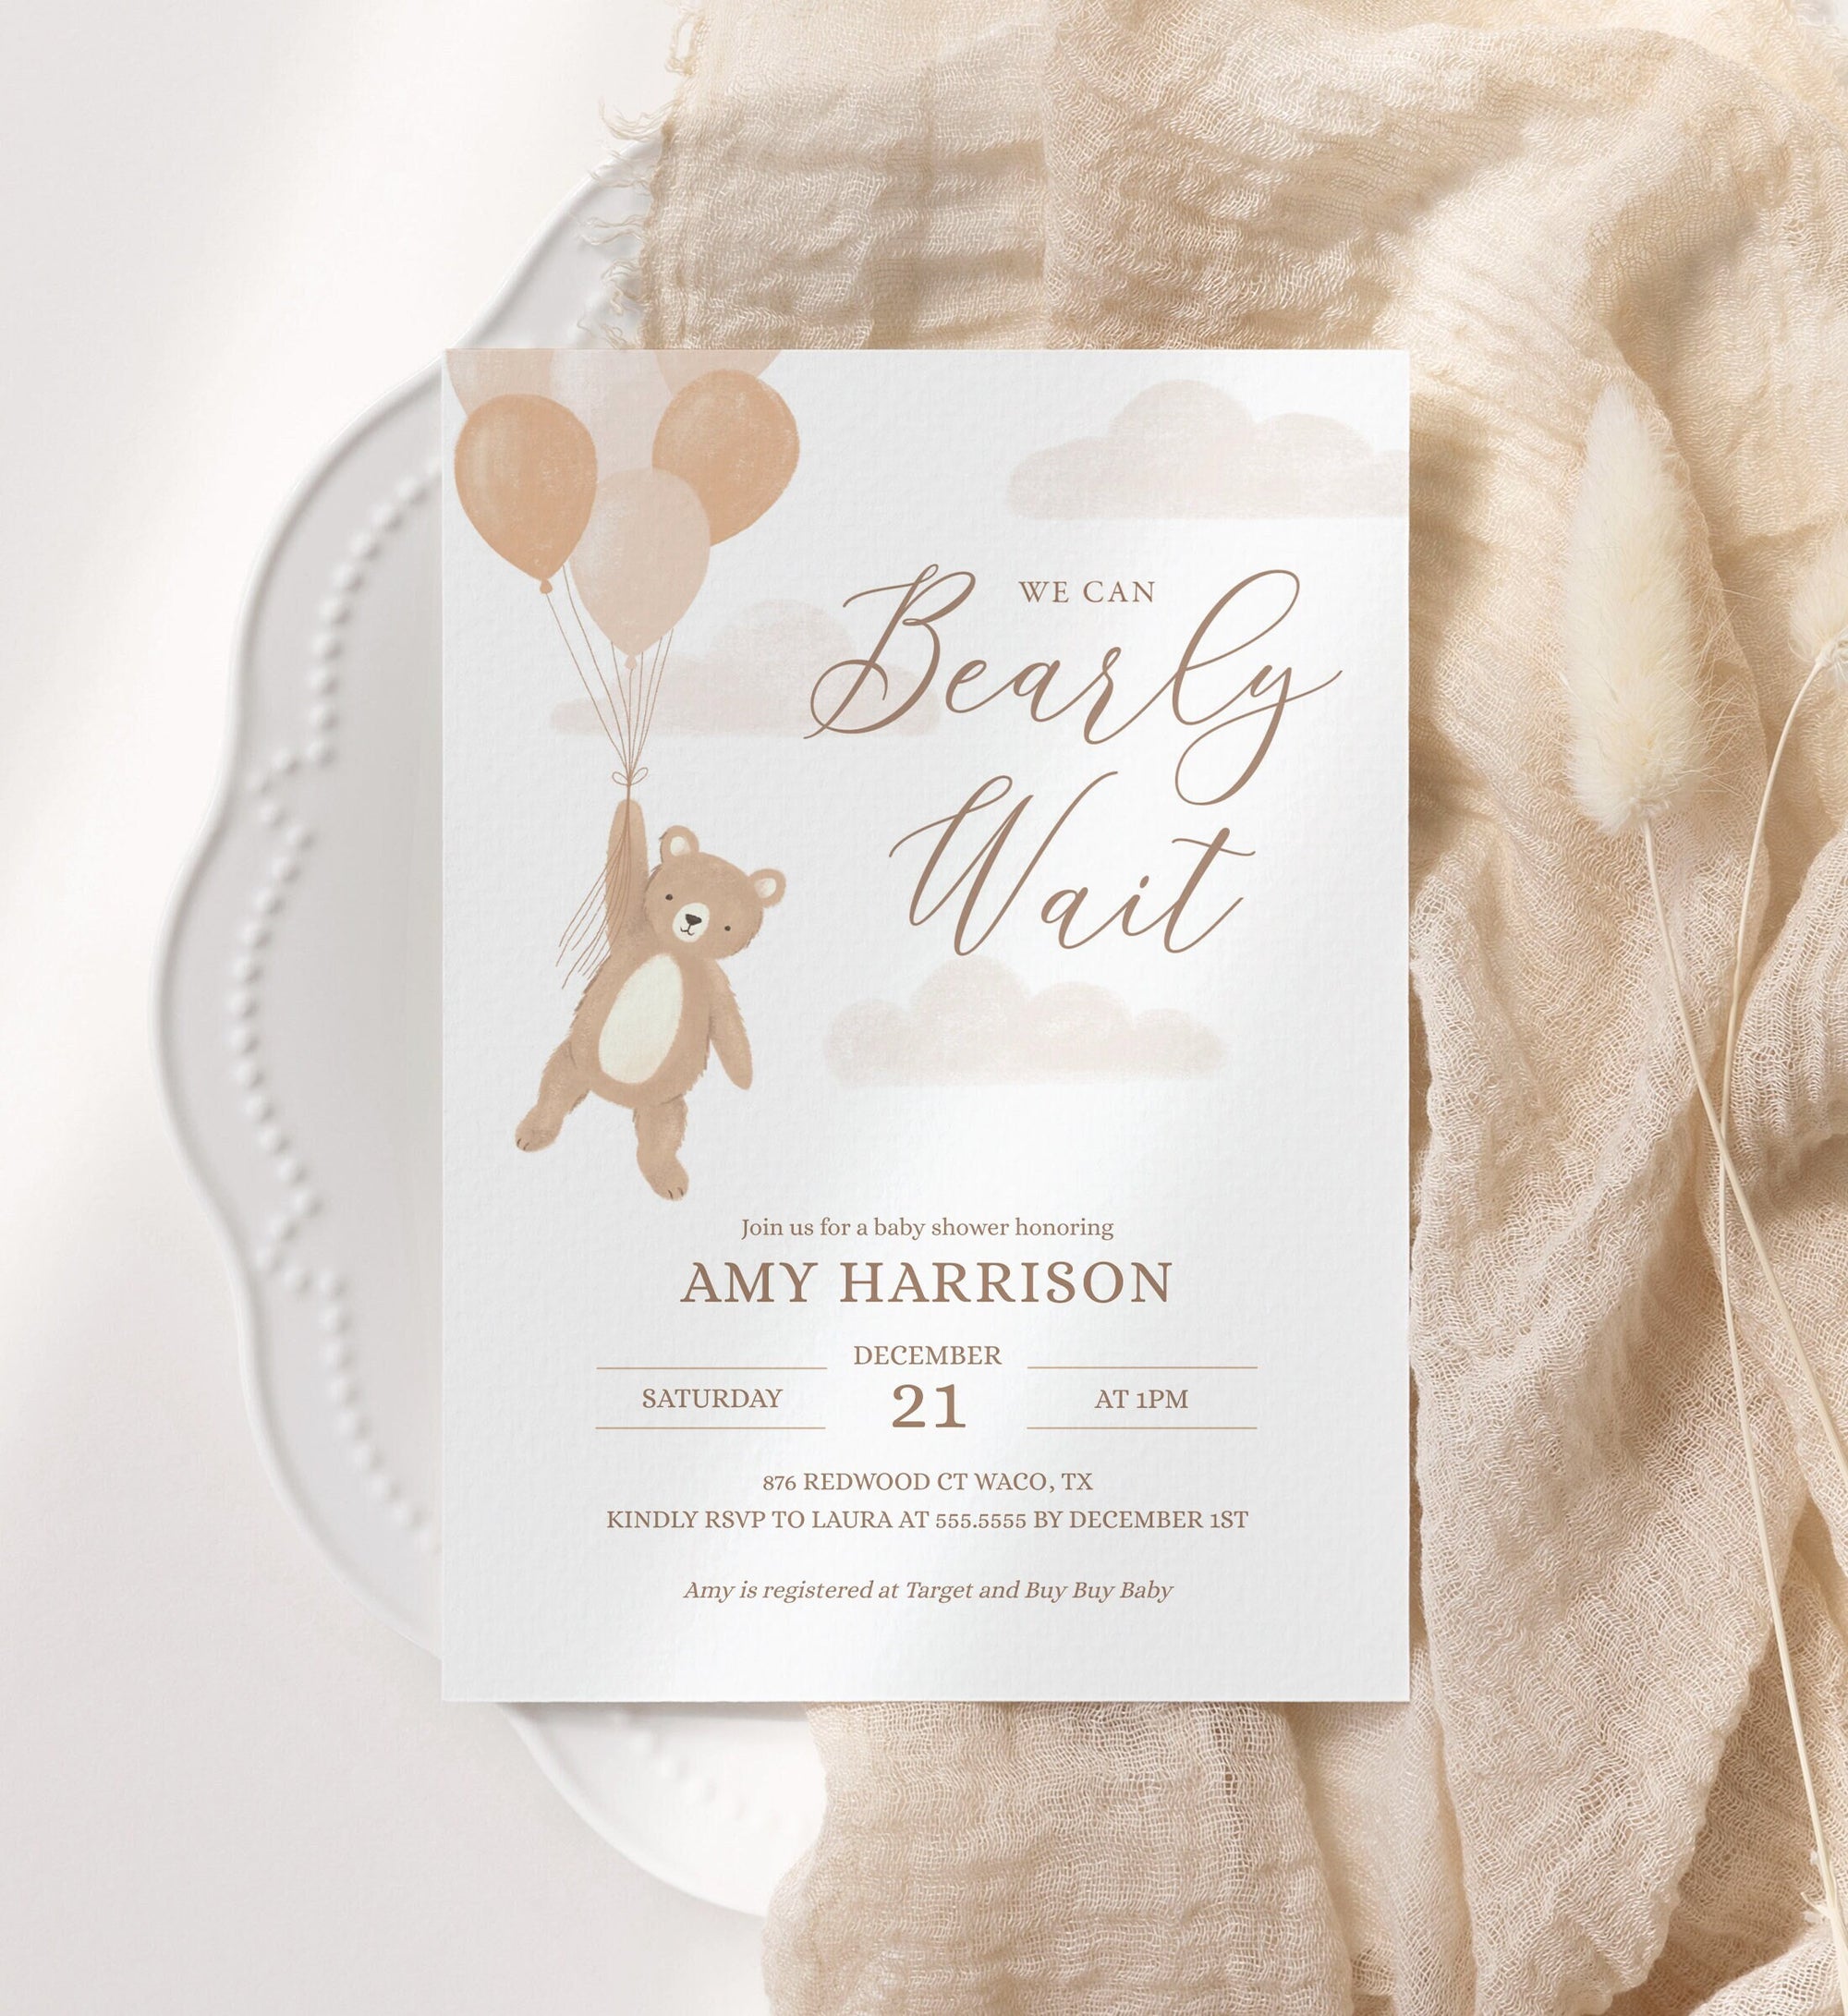 We Can Bearly Wait Baby Shower Invitation, Teddy Bear Balloon Baby Shower Invite, Printable Invitation Template, DIGITAL DOWNLOAD